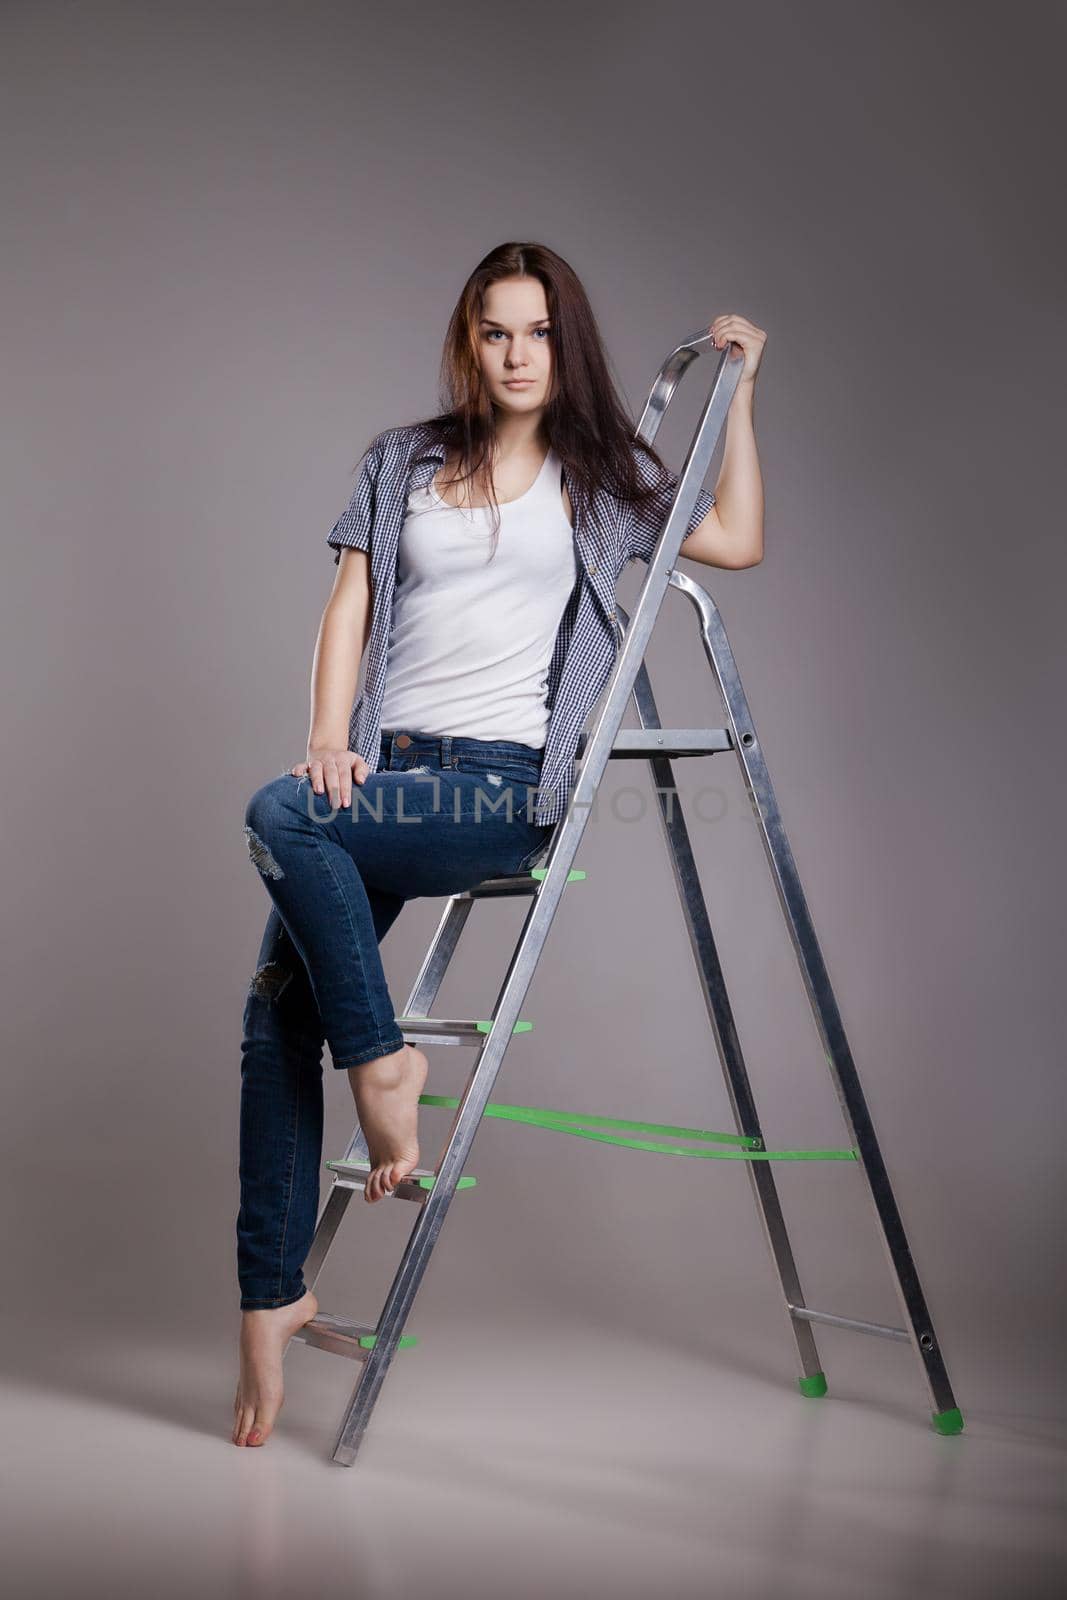 Young woman on step ladder. by Julenochek